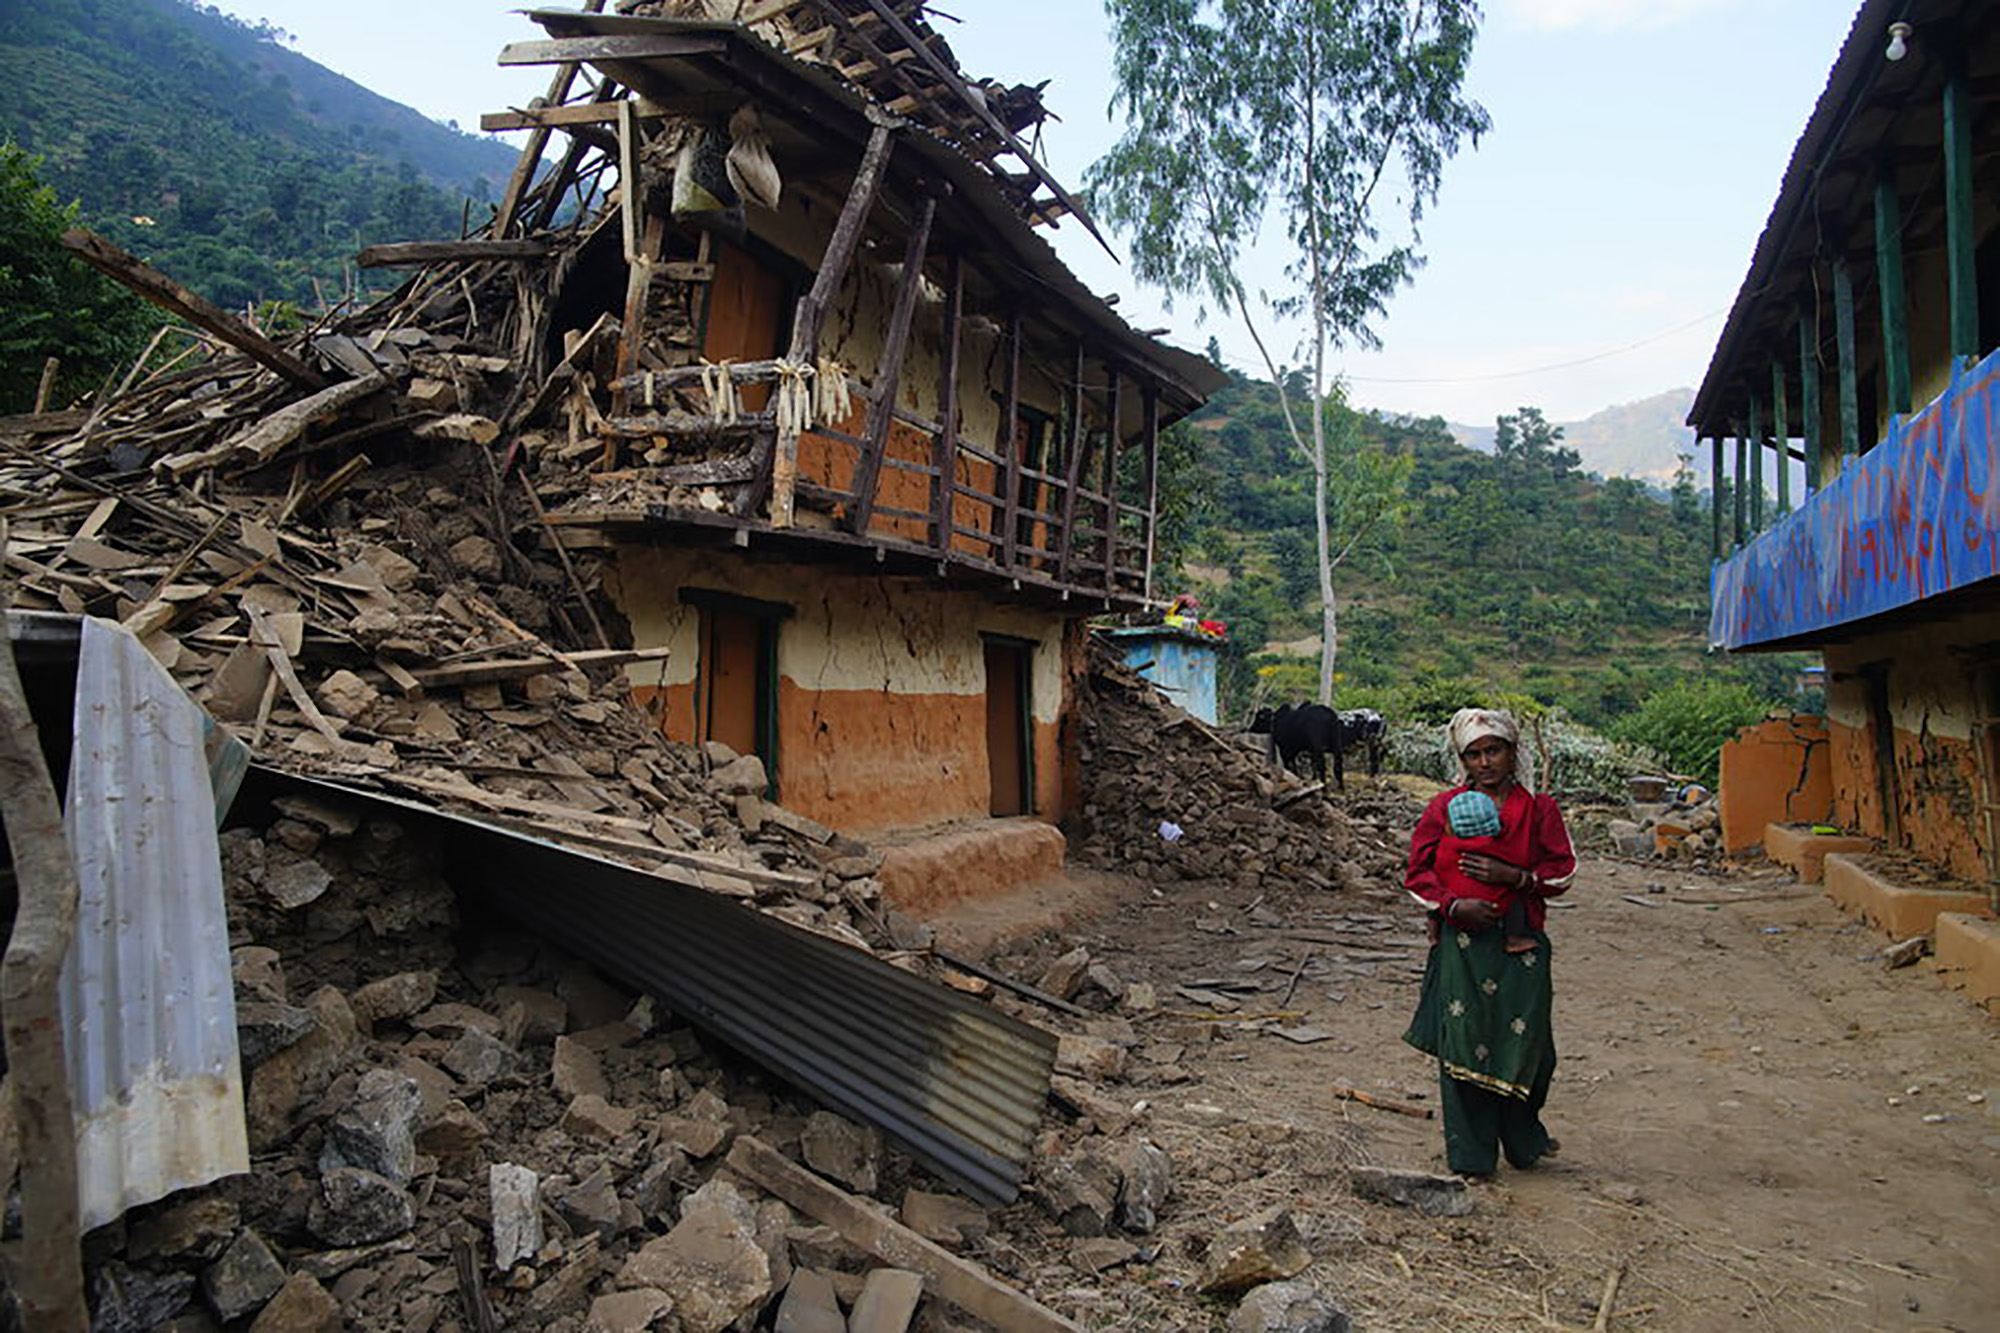 Two Nepal earthquake survivors walking past a house destroyed by the quake.